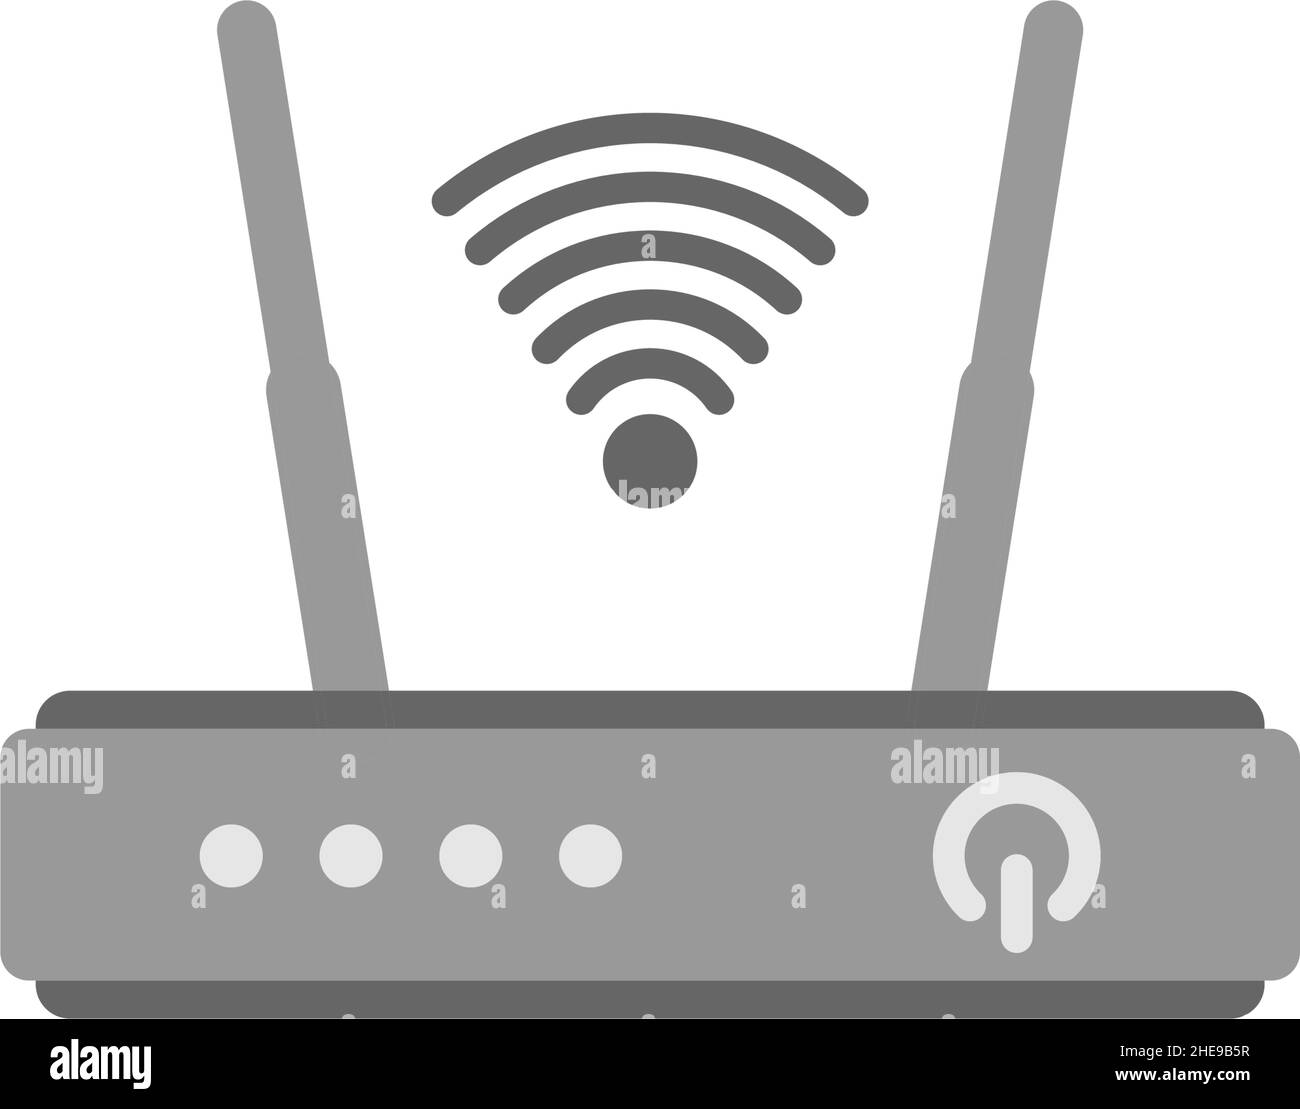 Wifi router icon design template vector isolated Stock Vector